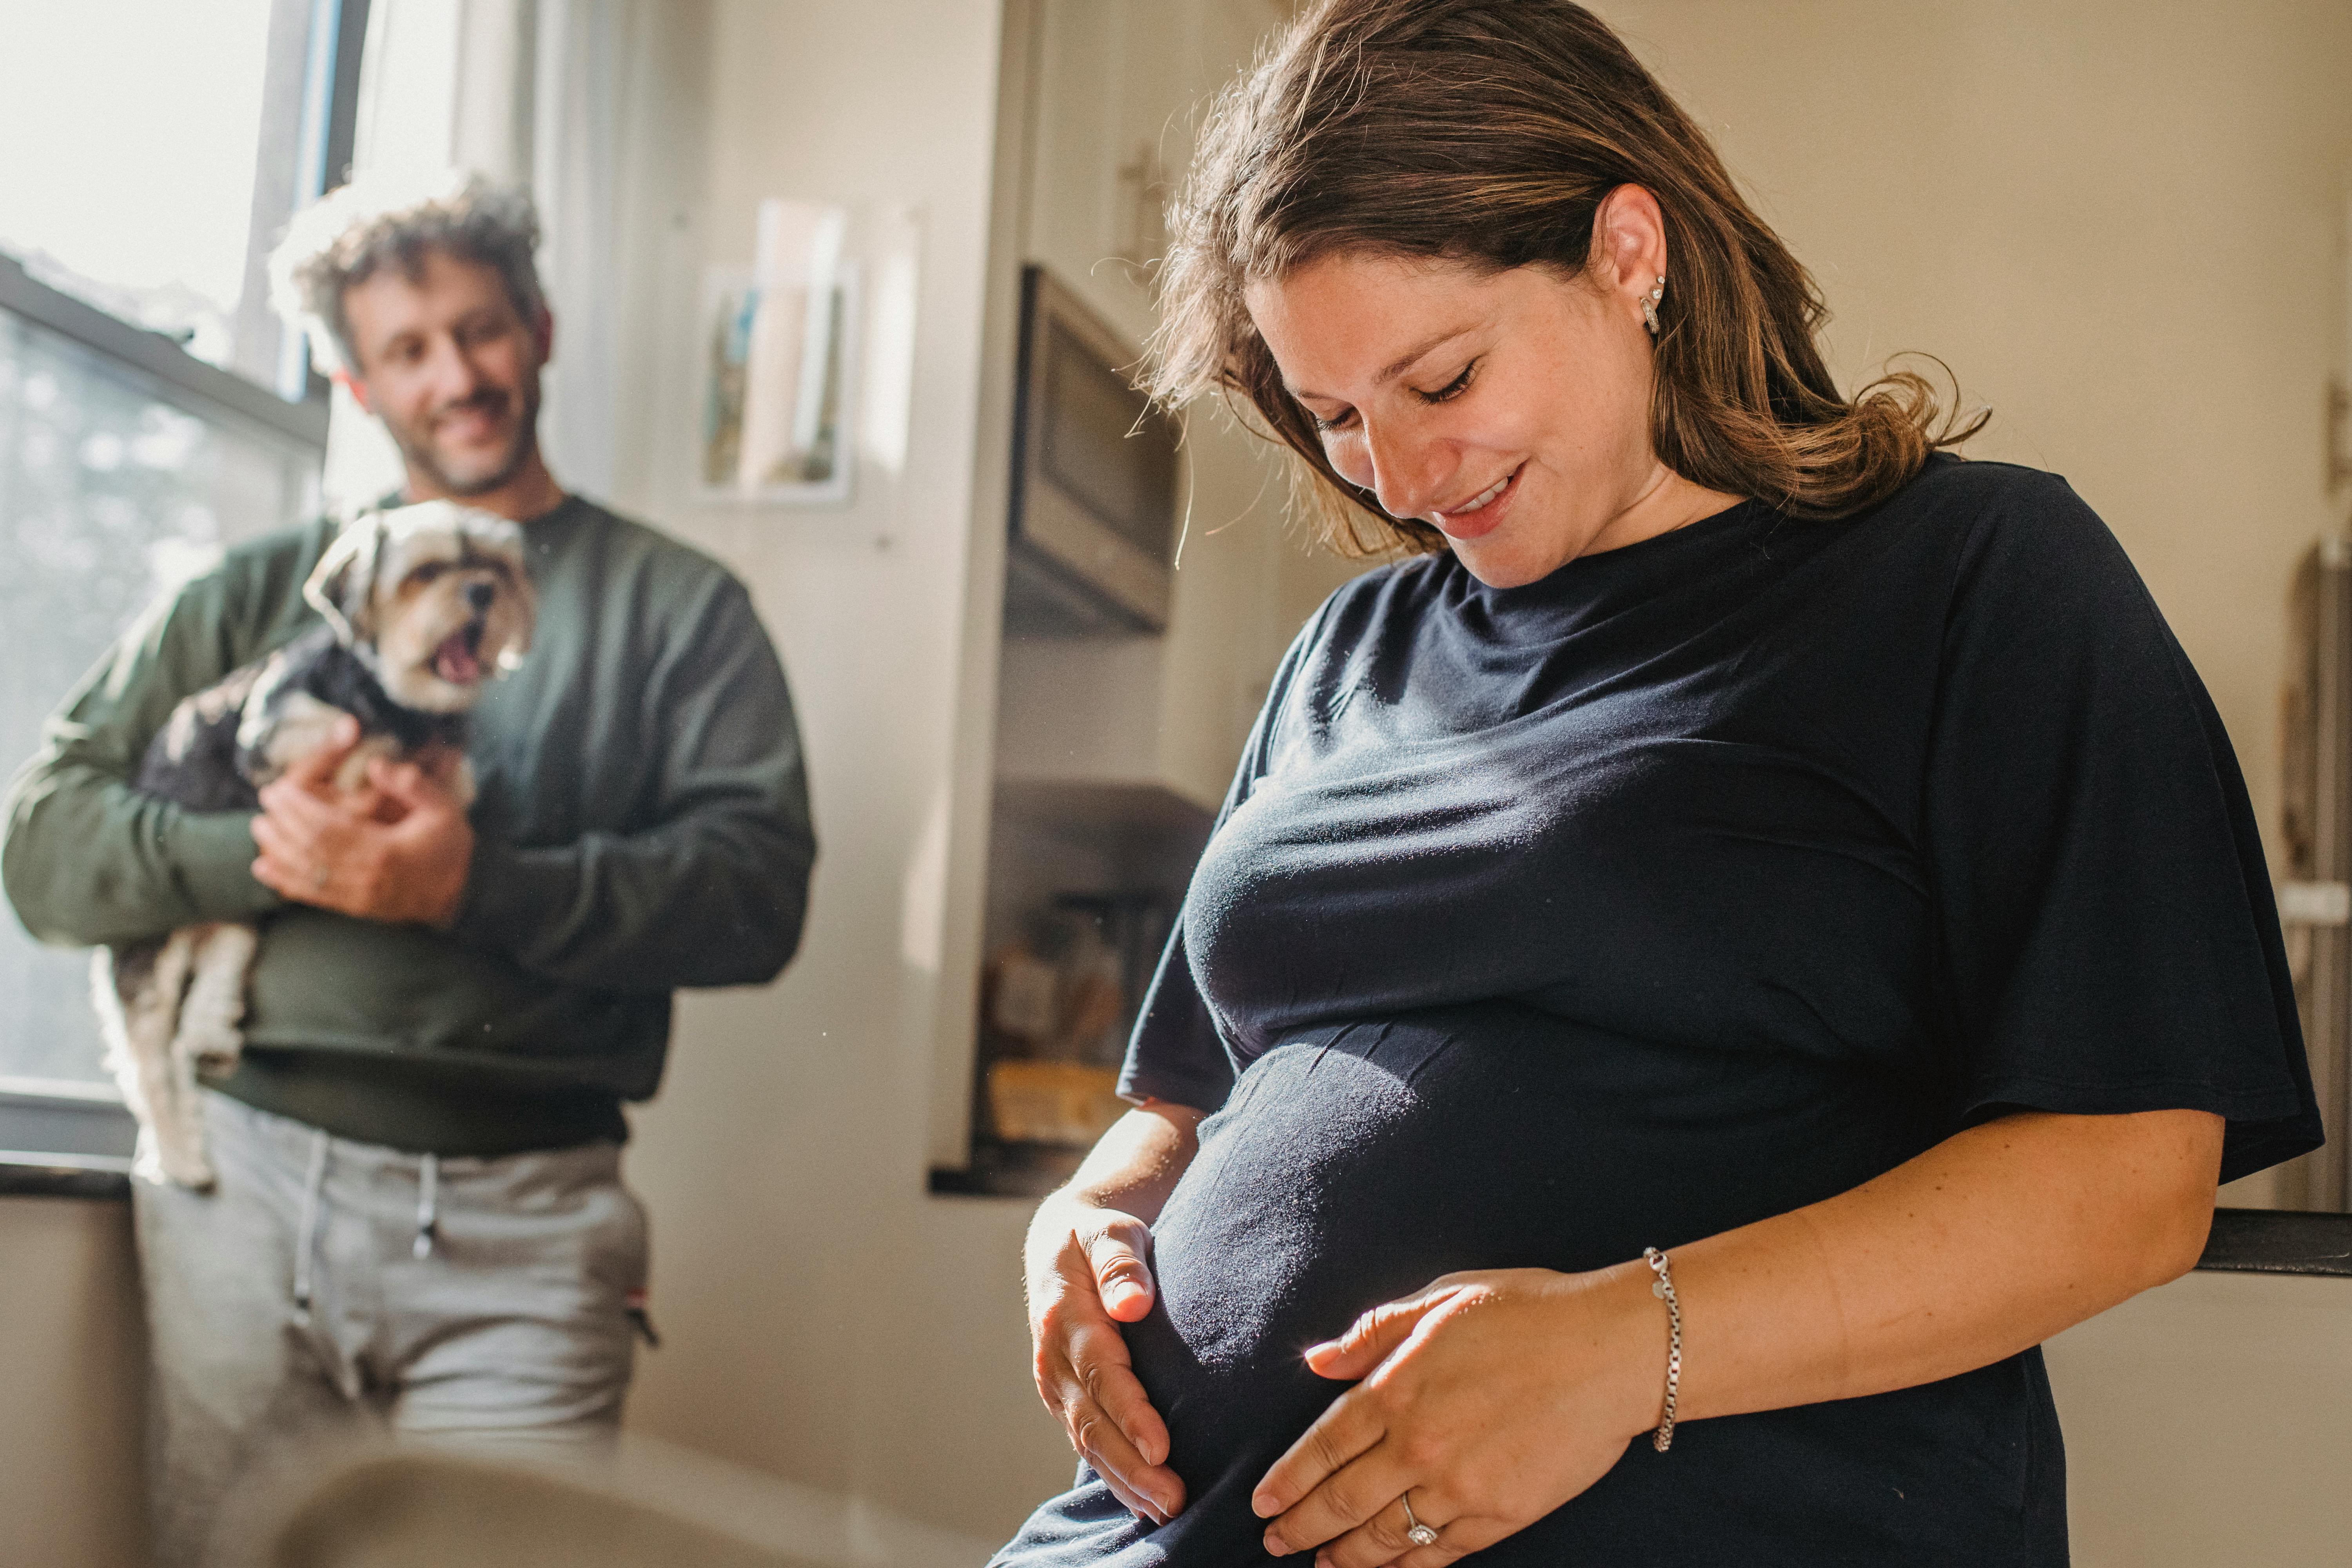 A happy pregnant couple hanging out | Source: Pexels